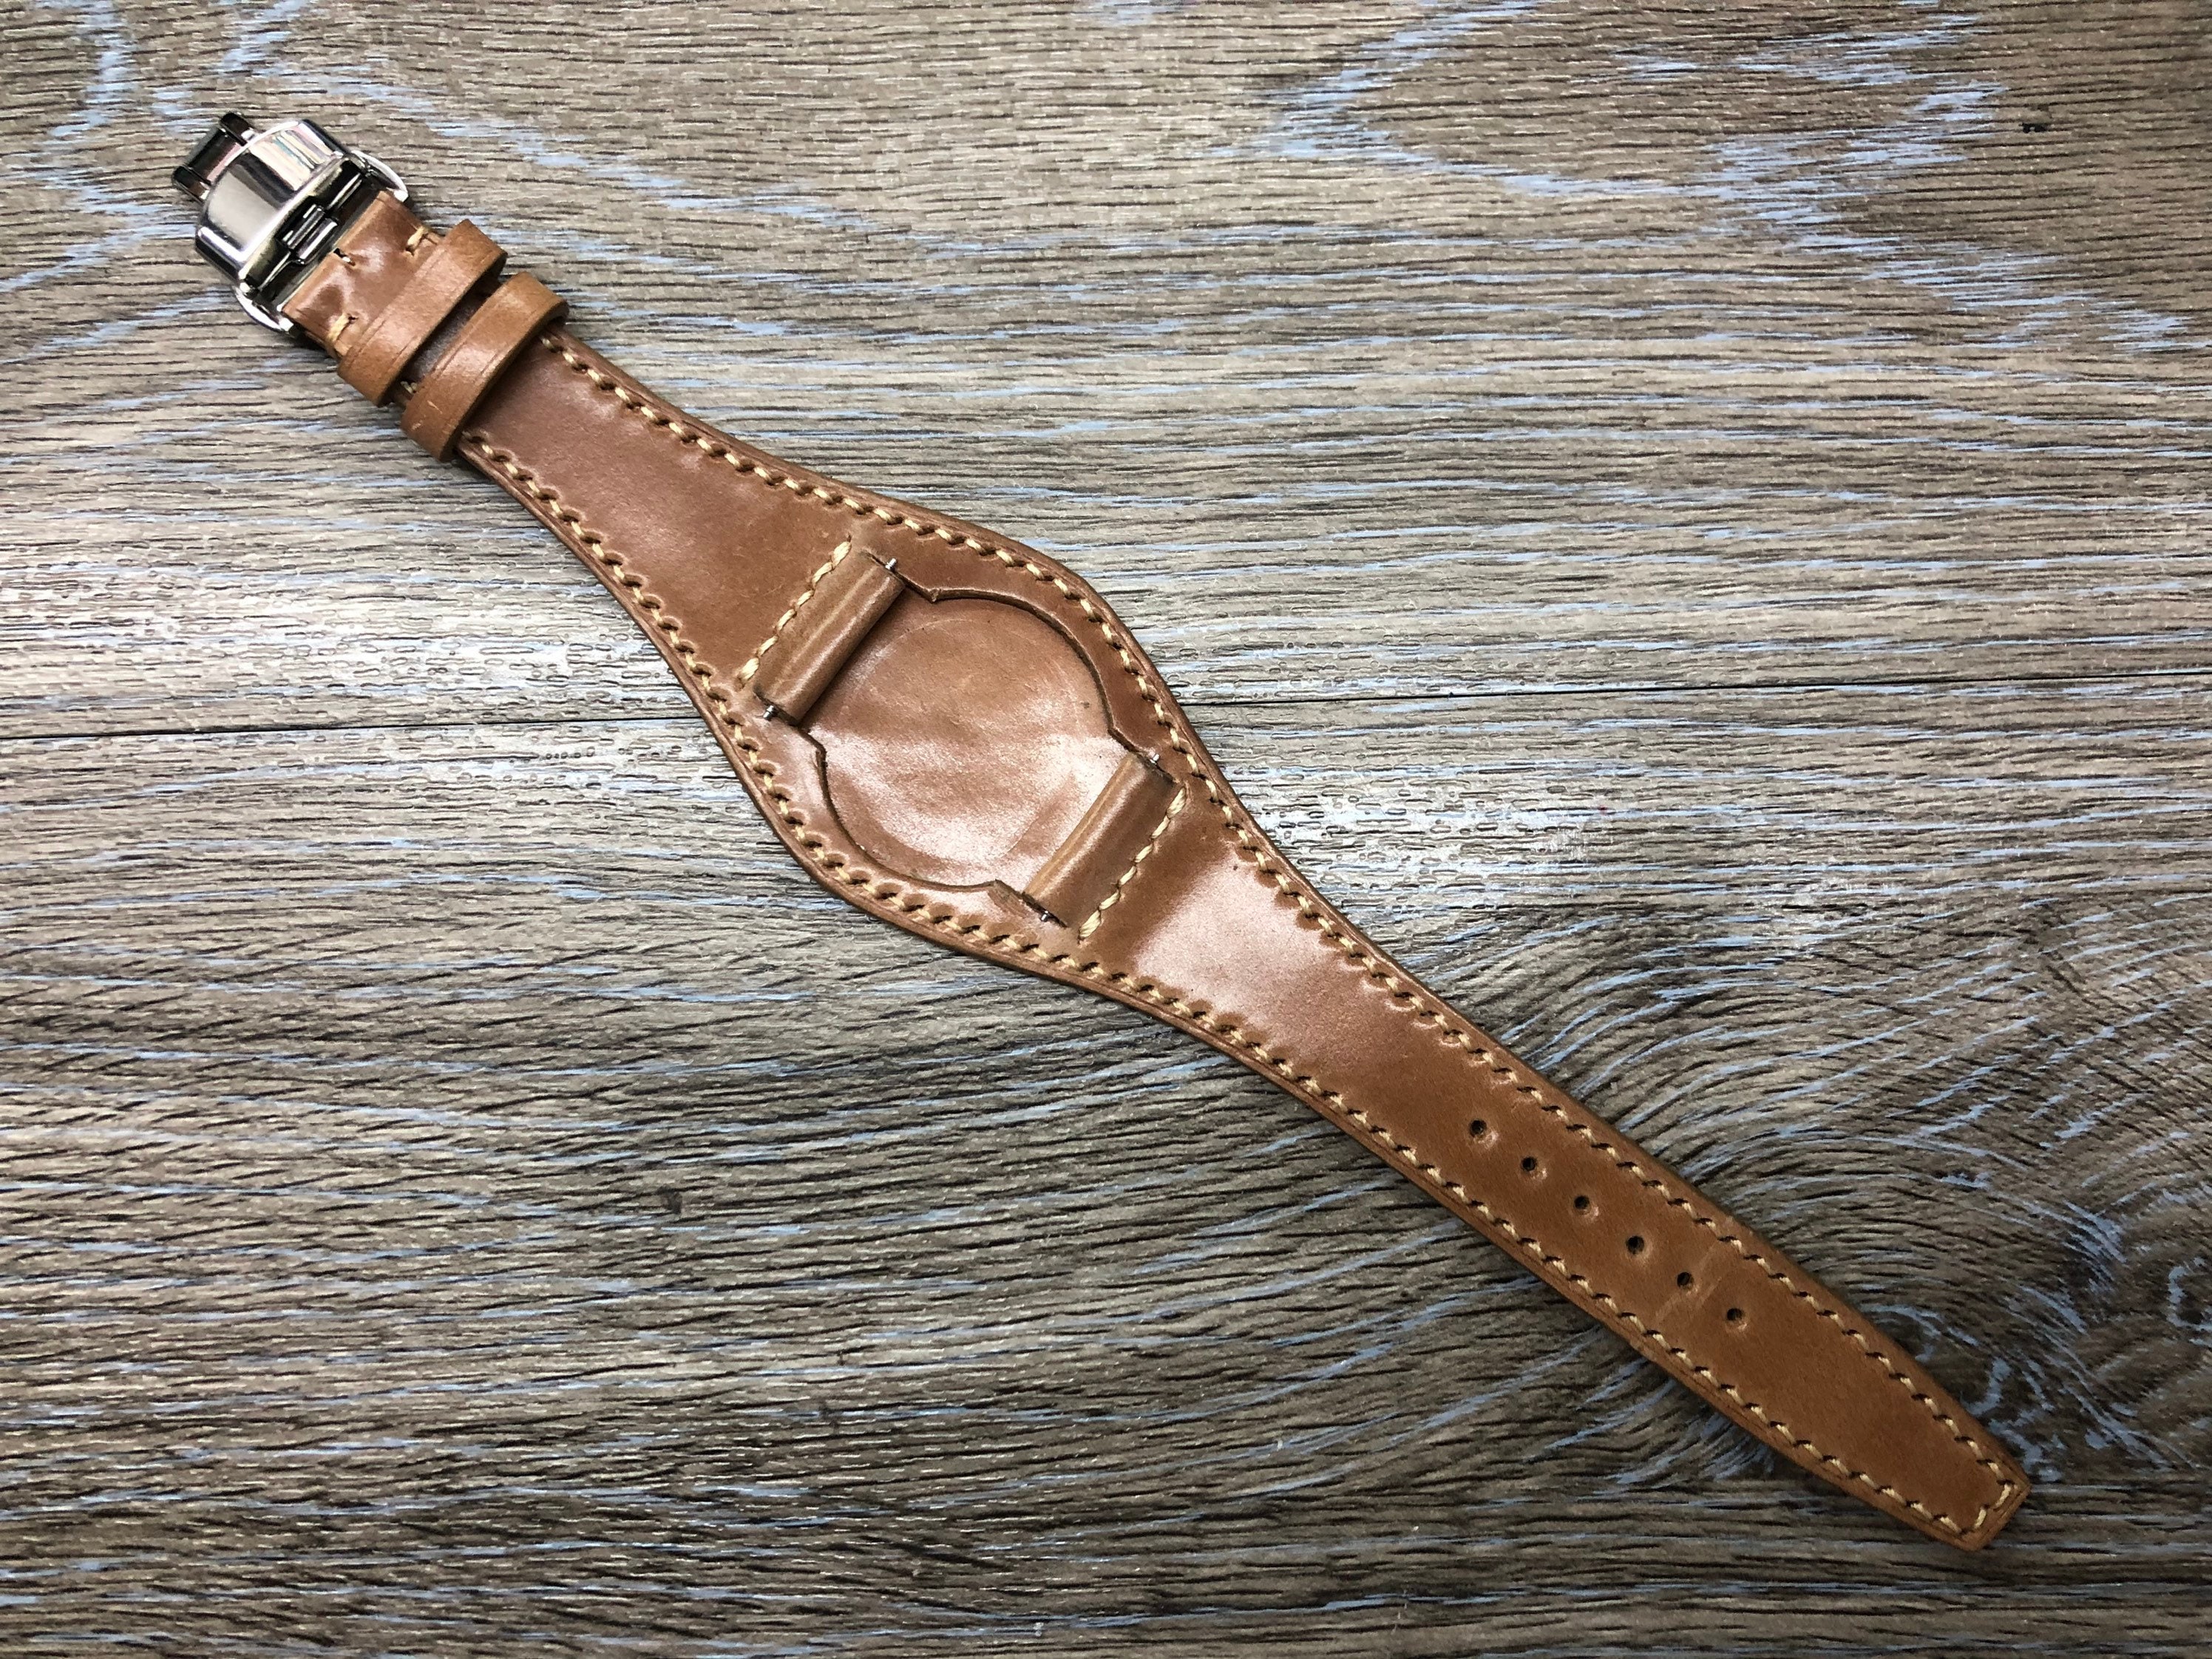 Shell Cordovan Full bund Leather Watch straps Leather watch | Etsy